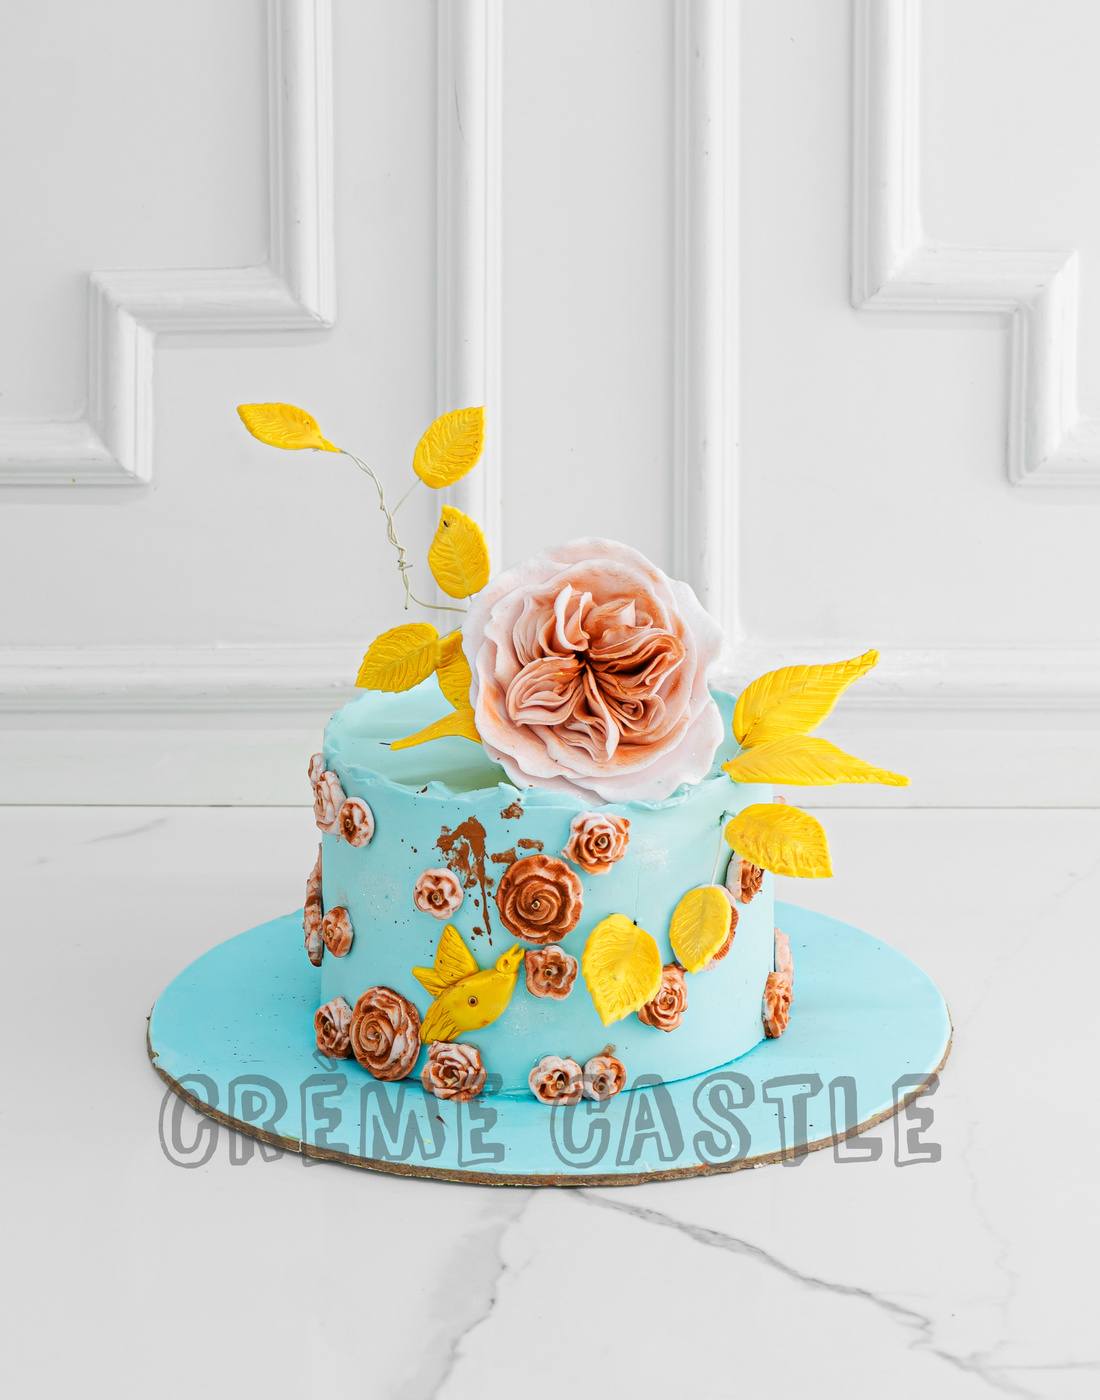 Turquoise Floral Cake with Piped Buttercream Flowers - Curly Girl Kitchen